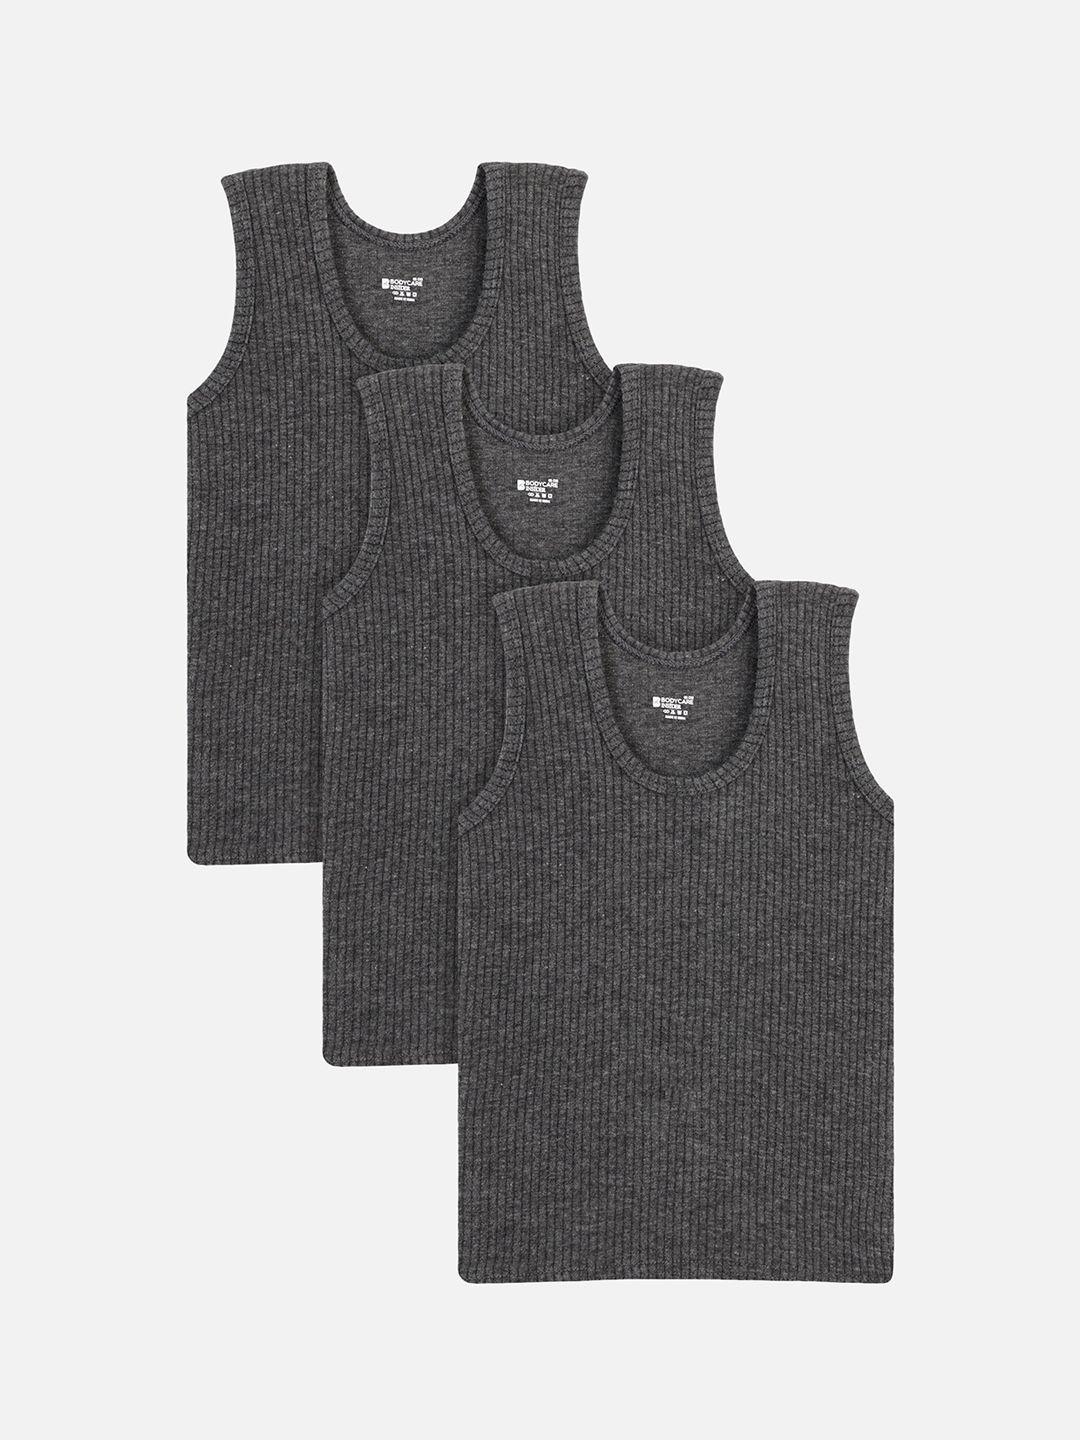 bodycare insider kids pack of 3 charcoal grey solid thermal tops